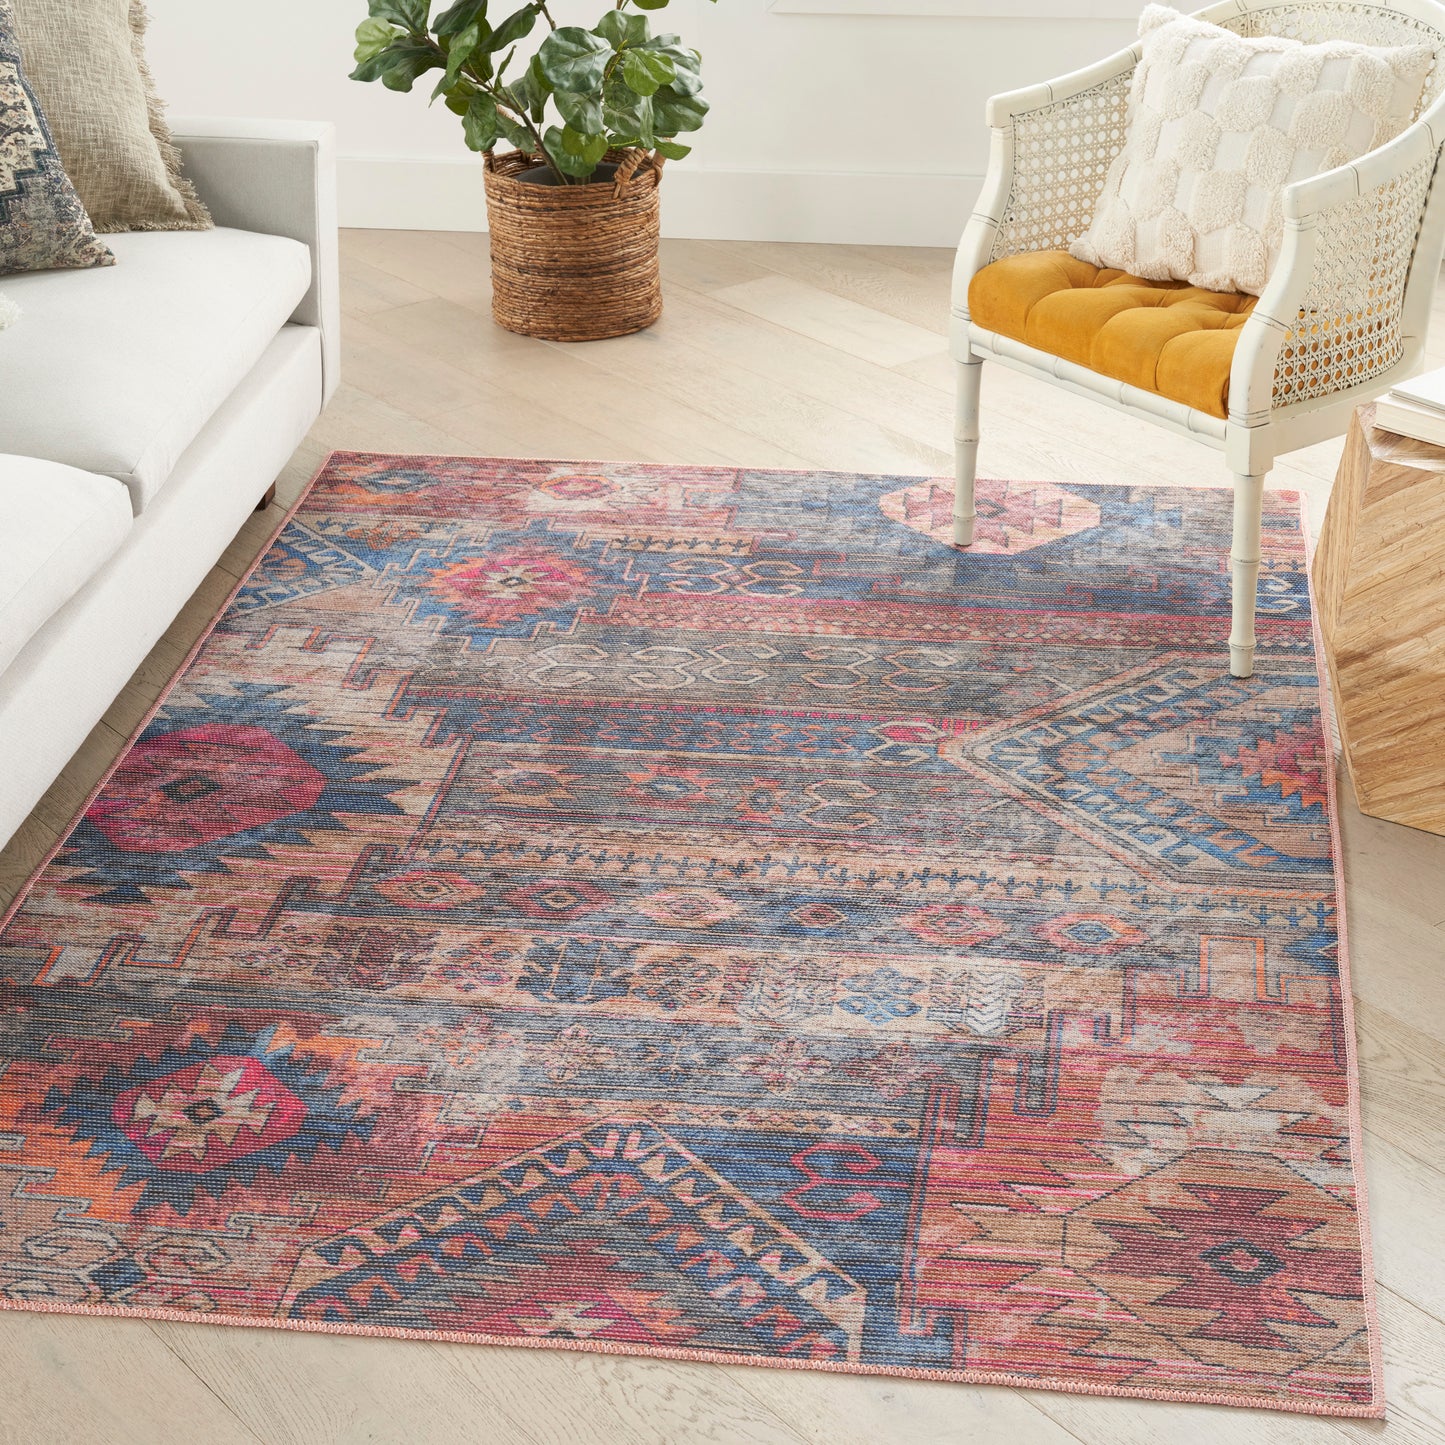 Nicole Curtis Machine Washable Series 1 SR106 Multicolor Traditional Machinemade Rug